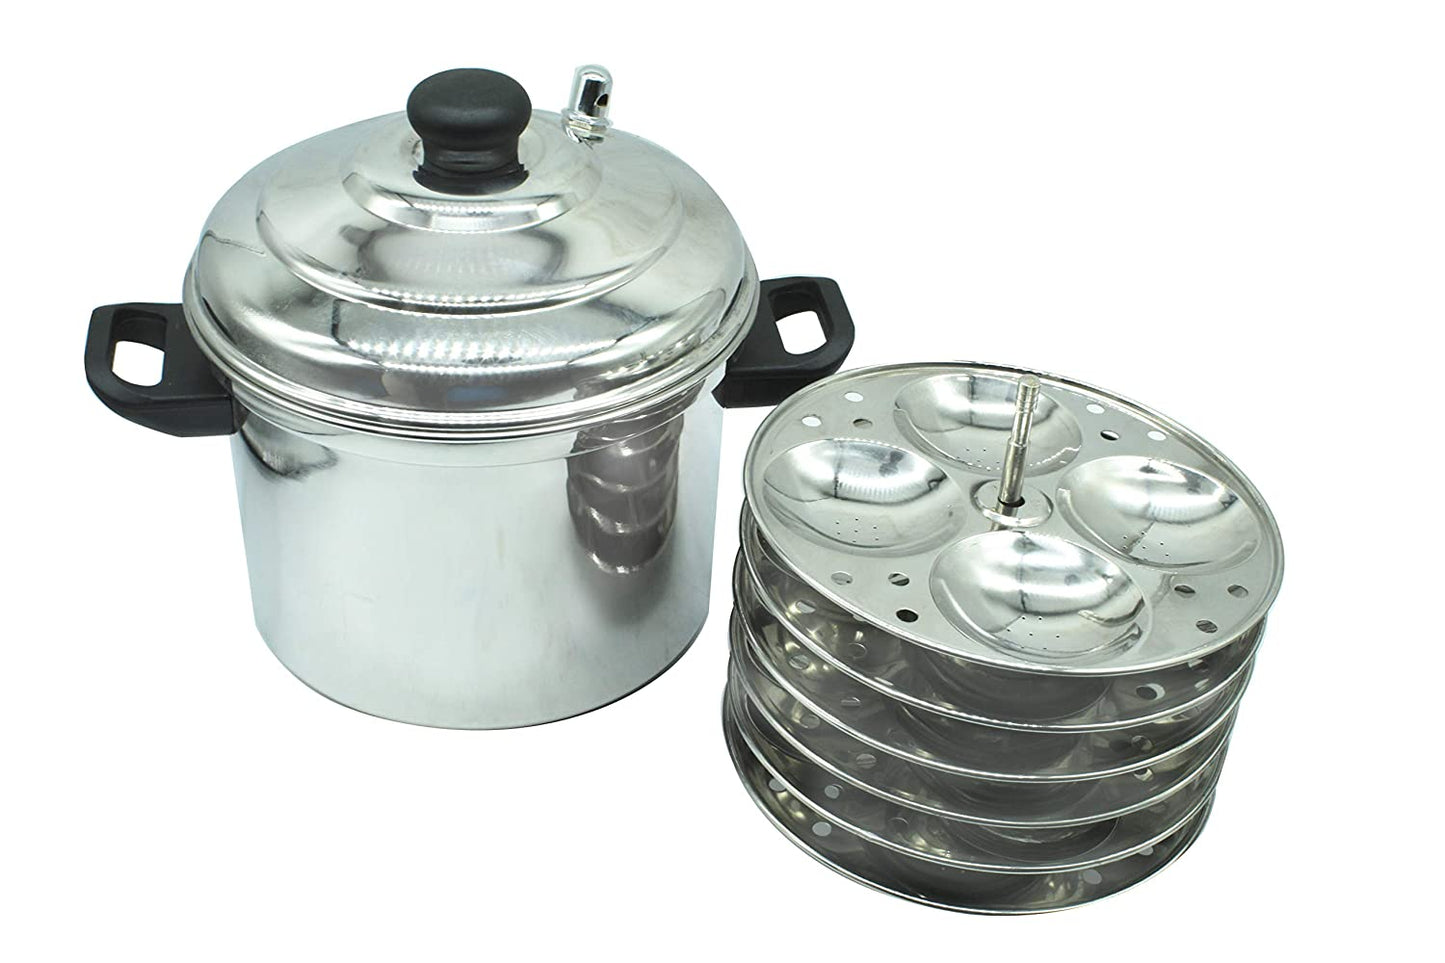 Stainless Steel Idli Maker | Steamer (6 Plates | 24 idlies) (Induction Compatible)